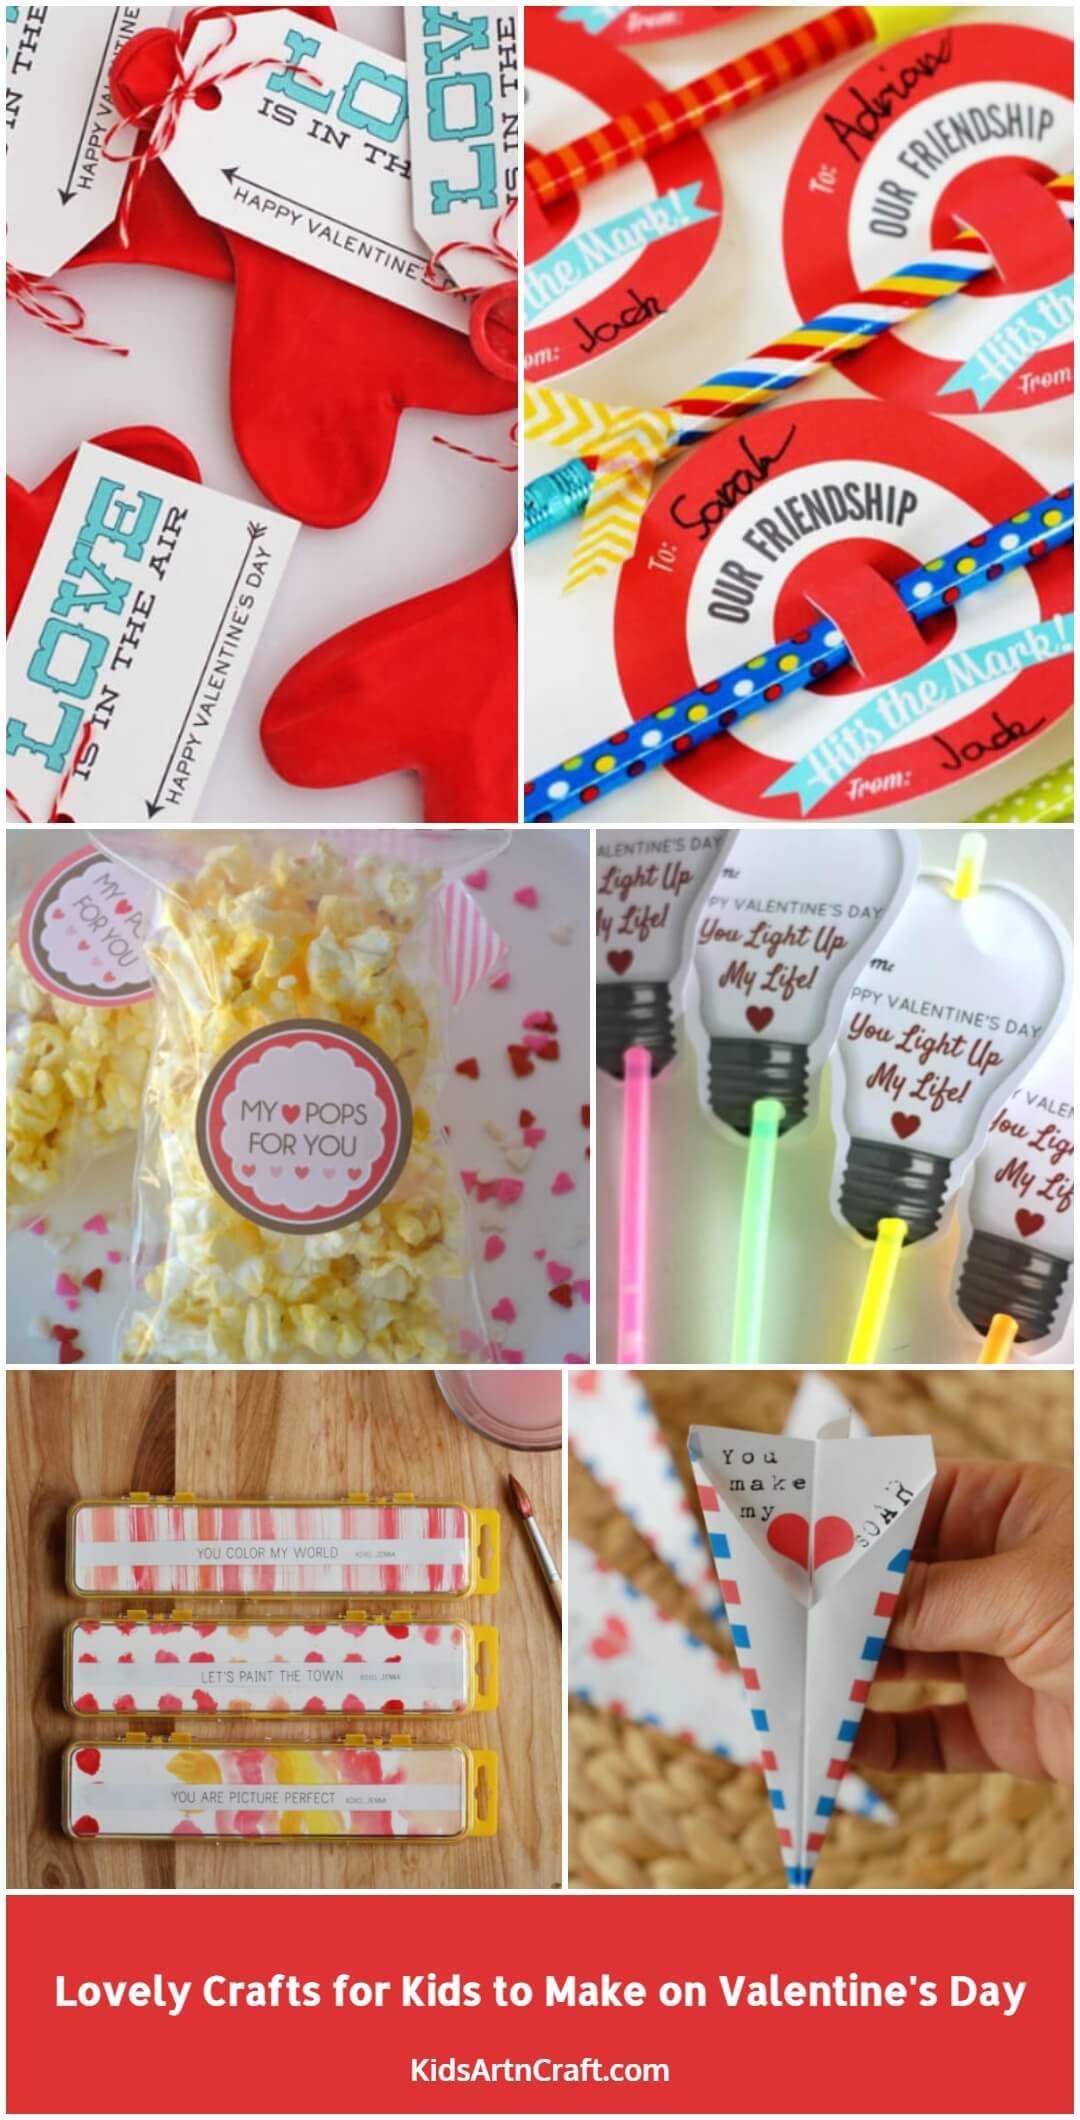 Lovely Crafts for Kids to Make on Valentine's Day